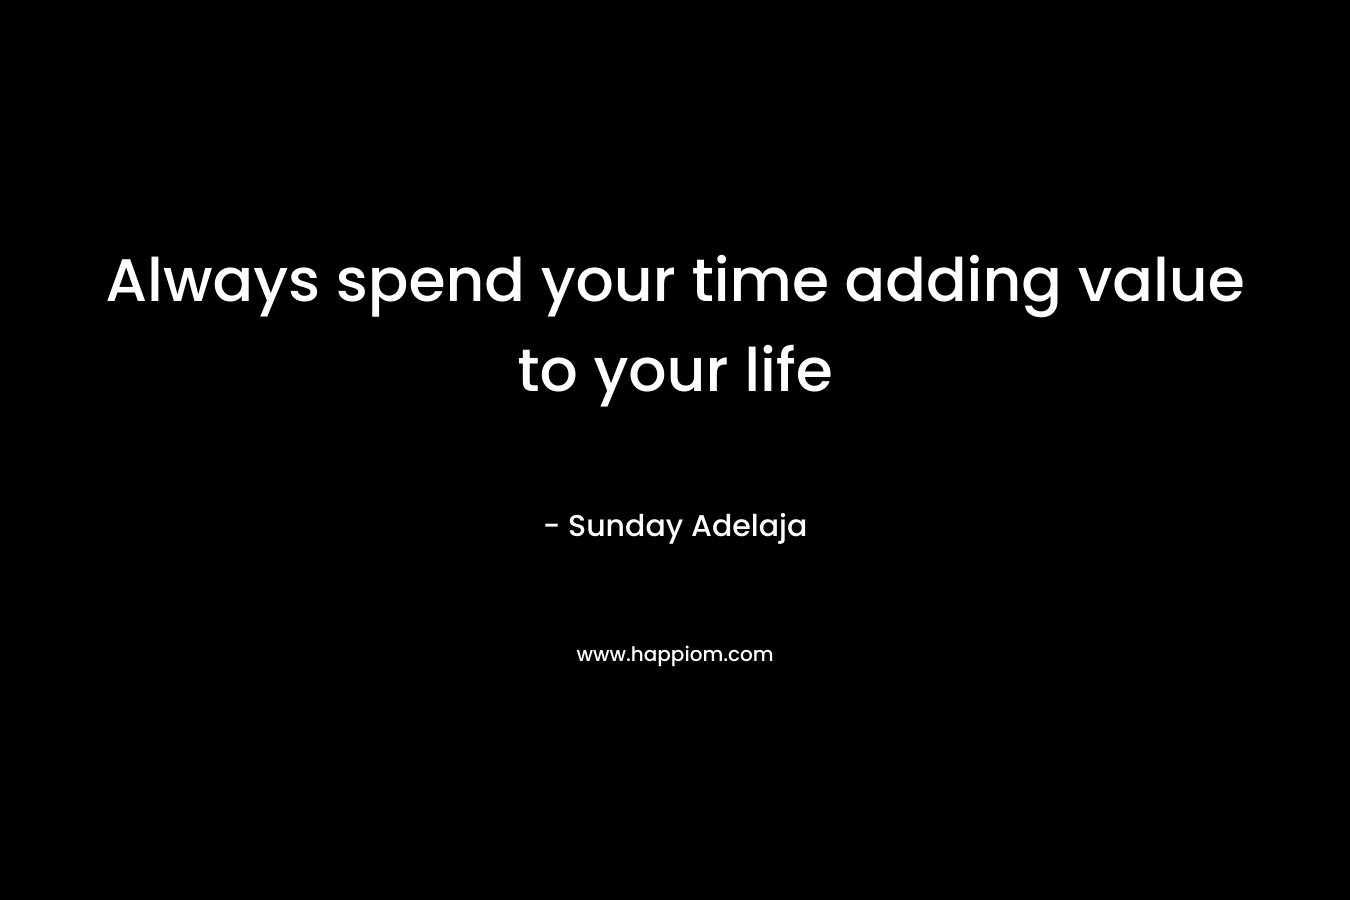 Always spend your time adding value to your life